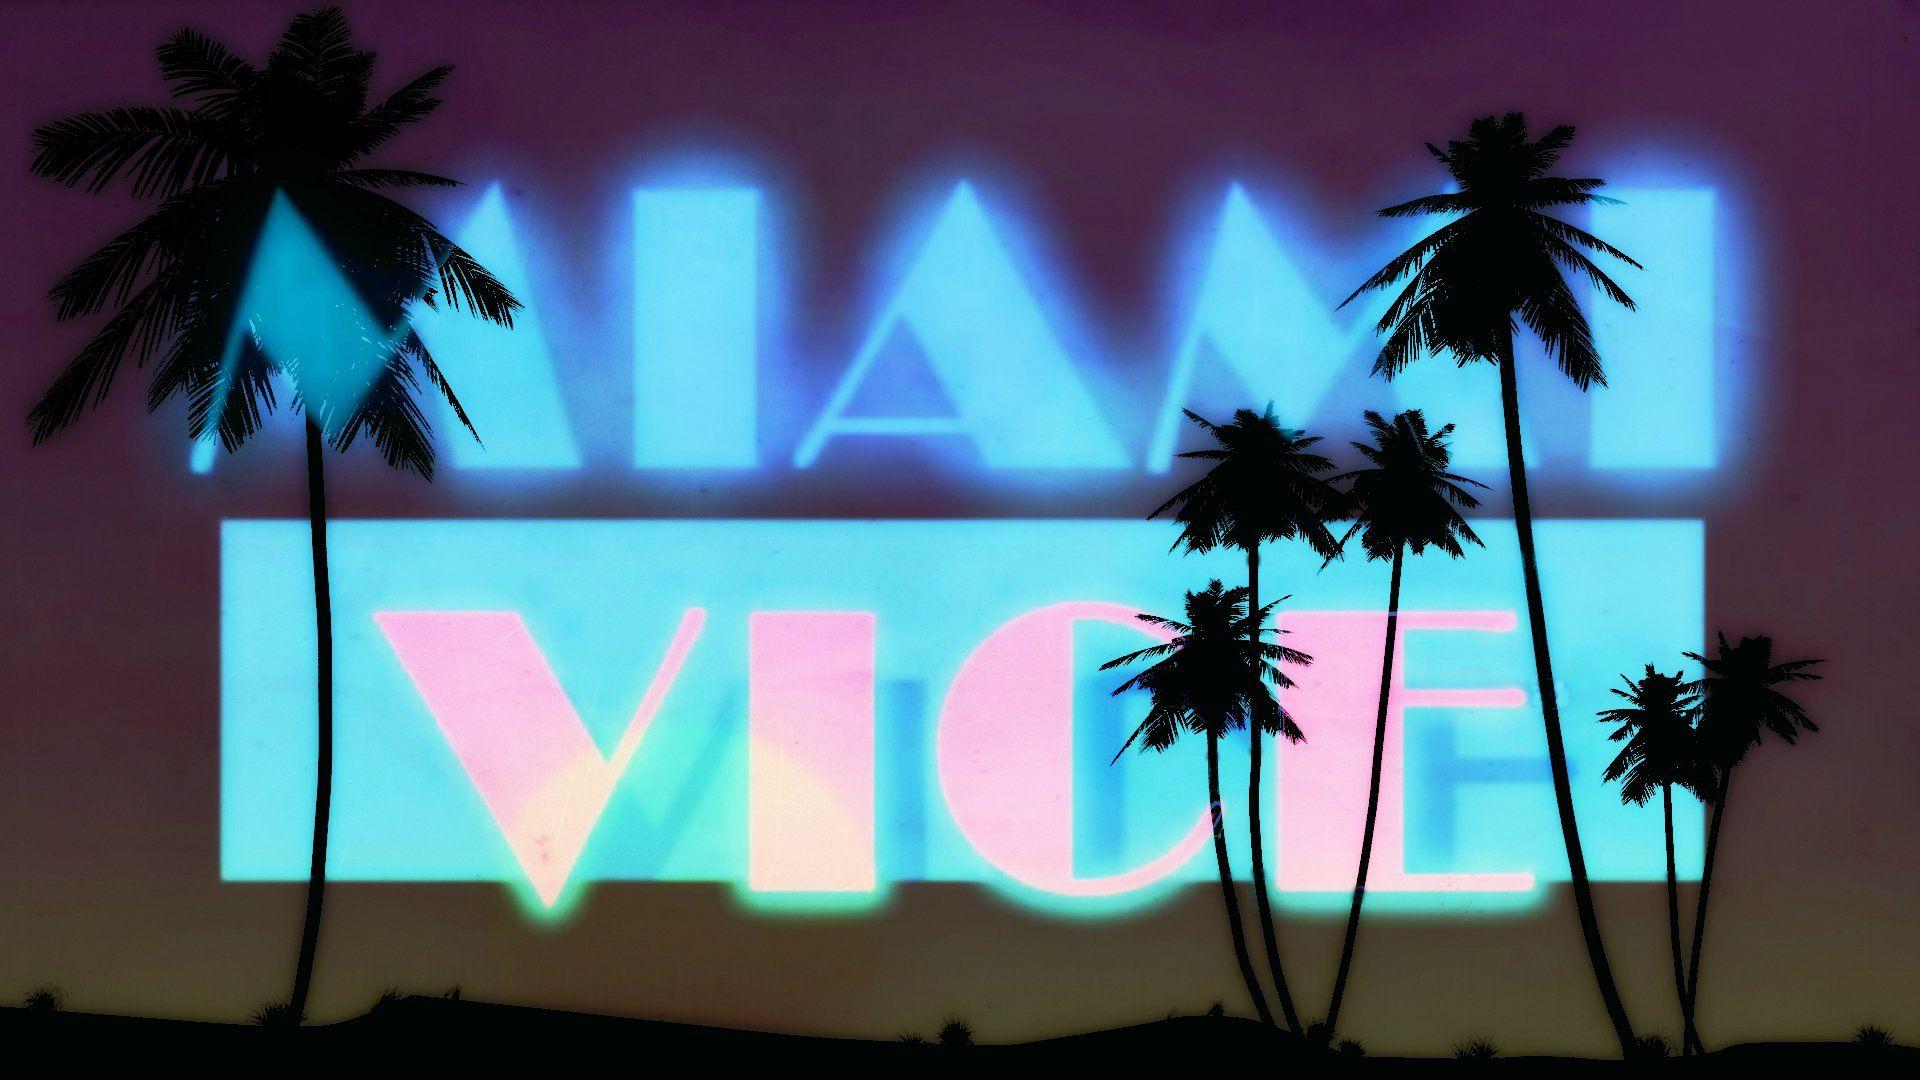 Miami Vice Pictures  Download Free Images on Unsplash